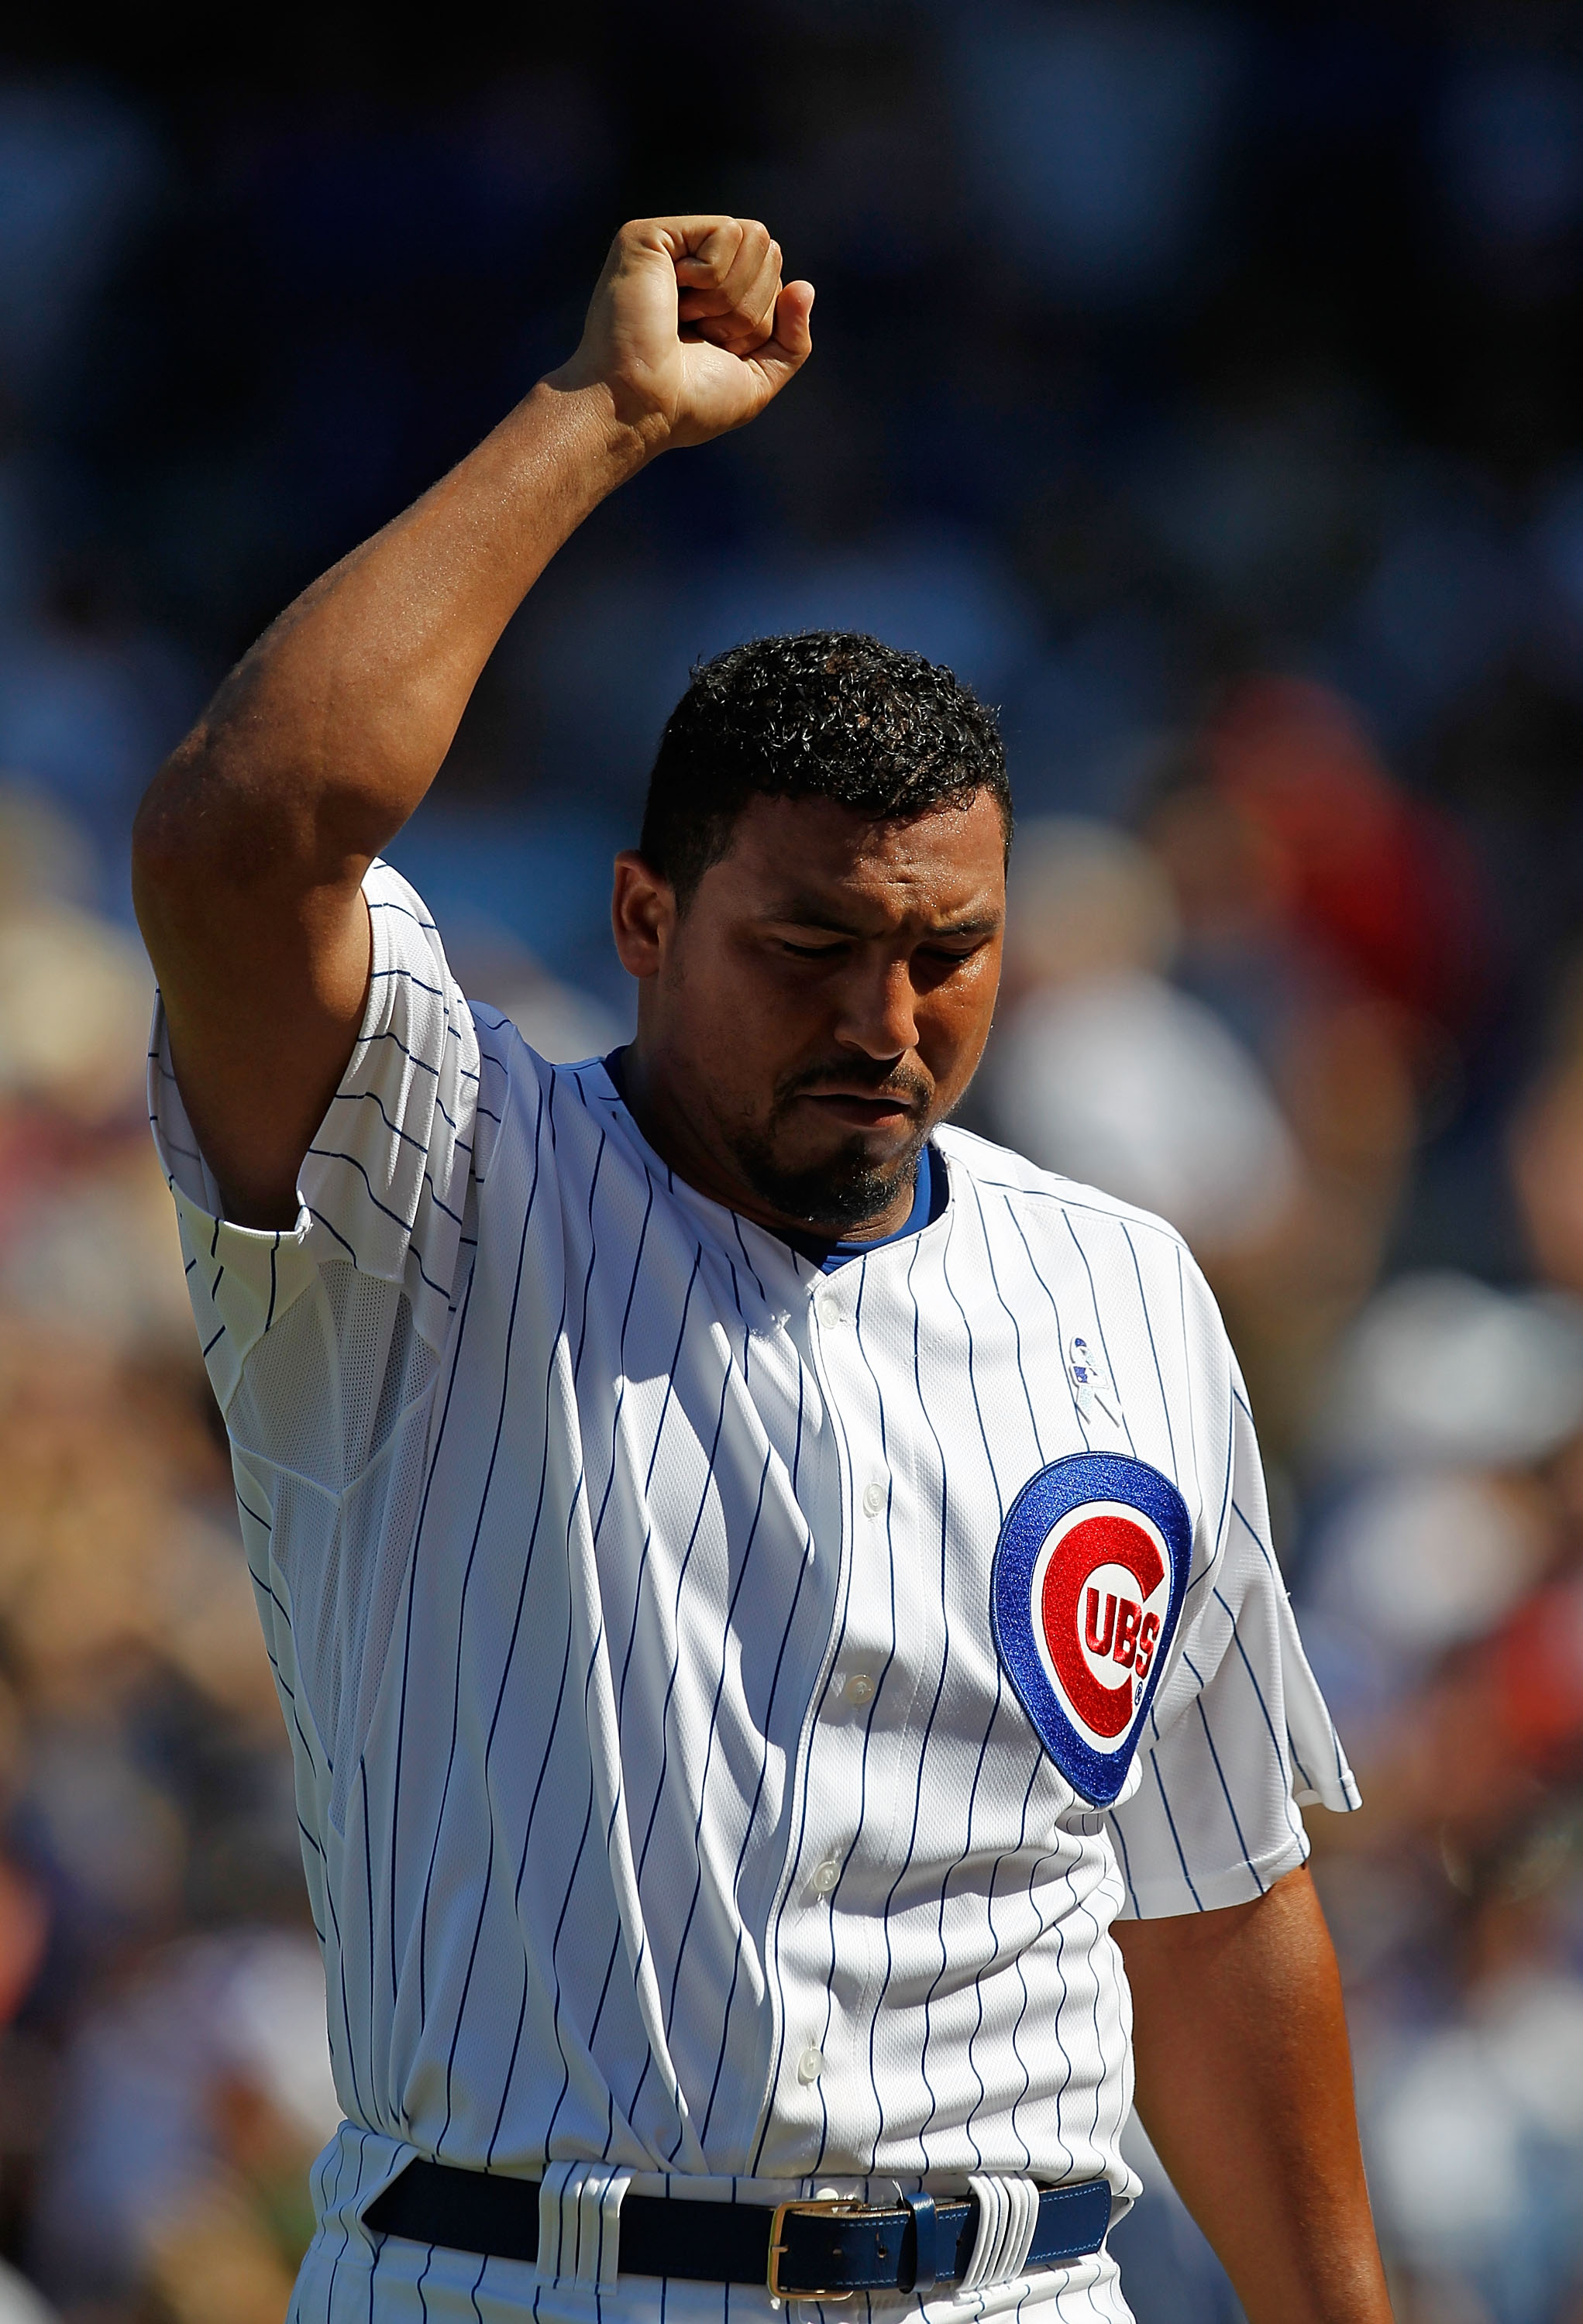 CHICAGO - JUNE 20: Carlos Zambrano #38 of the Chicago Cubs celebrates getting out of an inning-ending jam against the Los Angeles Angels of Anaheim at Wrigley Field on June 20, 2010 in Chicago, Illinois. The Cubs defeated the Angels 12-1. (Photo by Jonath